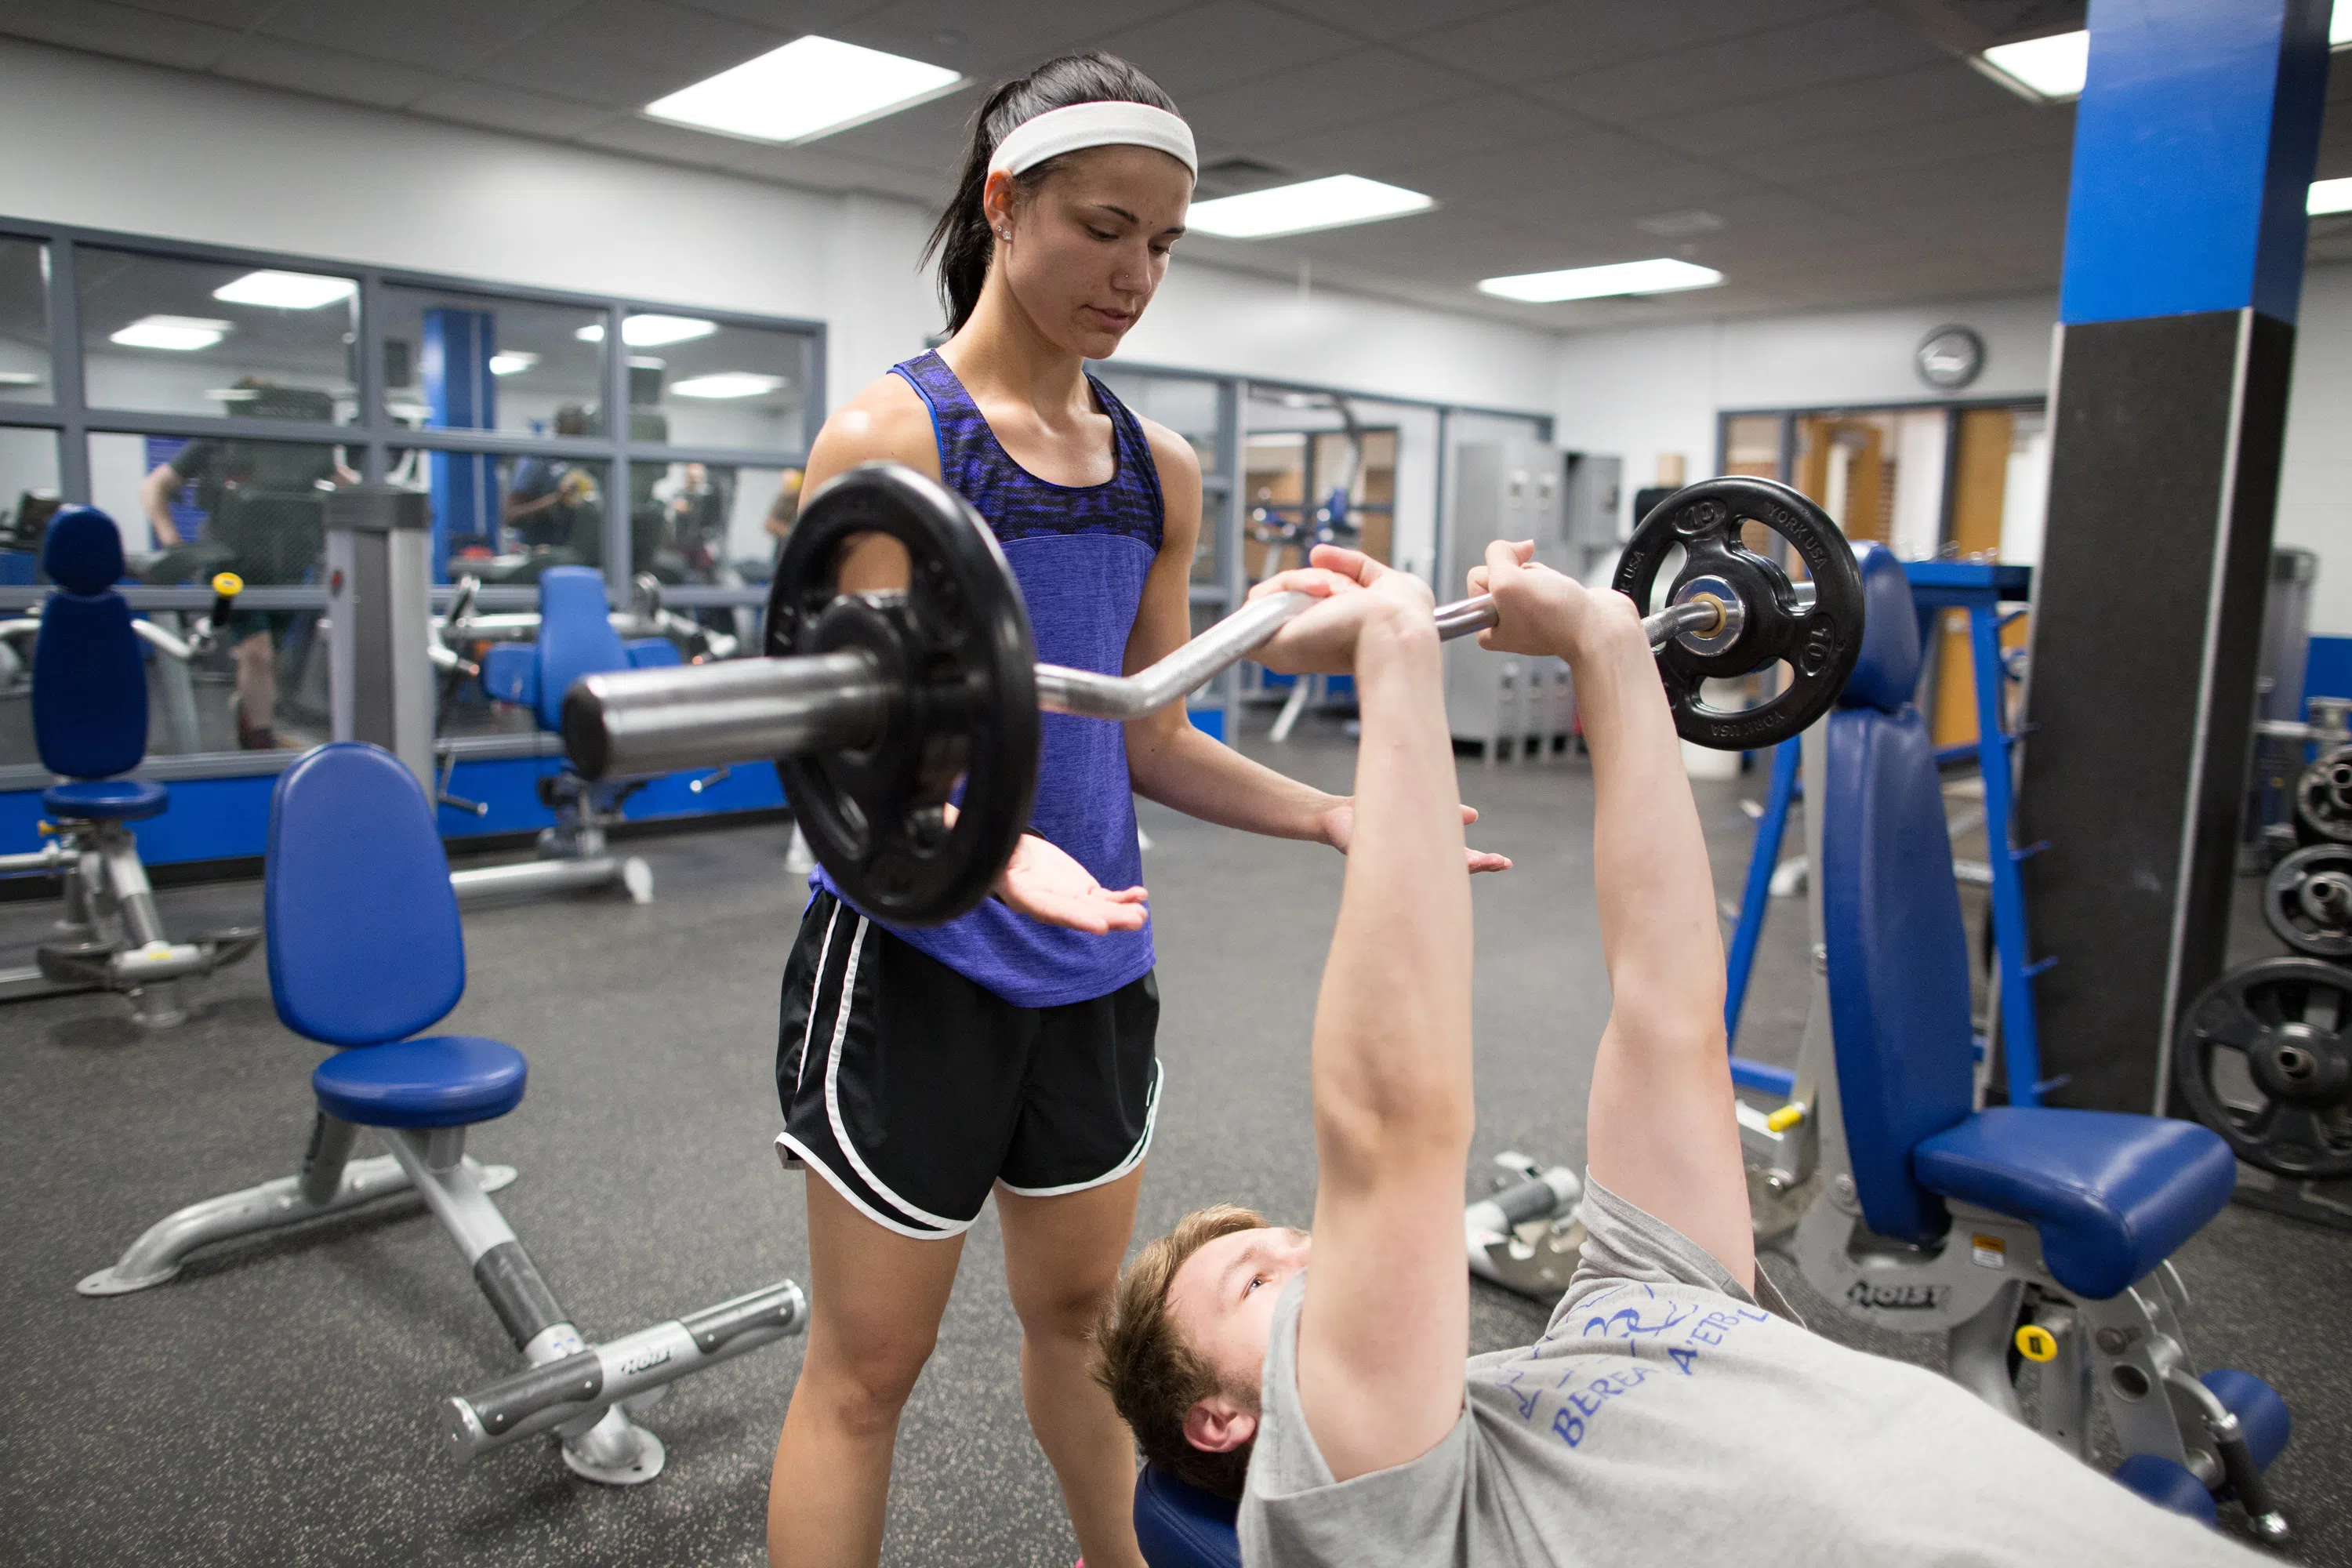 Female student helps "spot" a male student who is bench pressing weights..